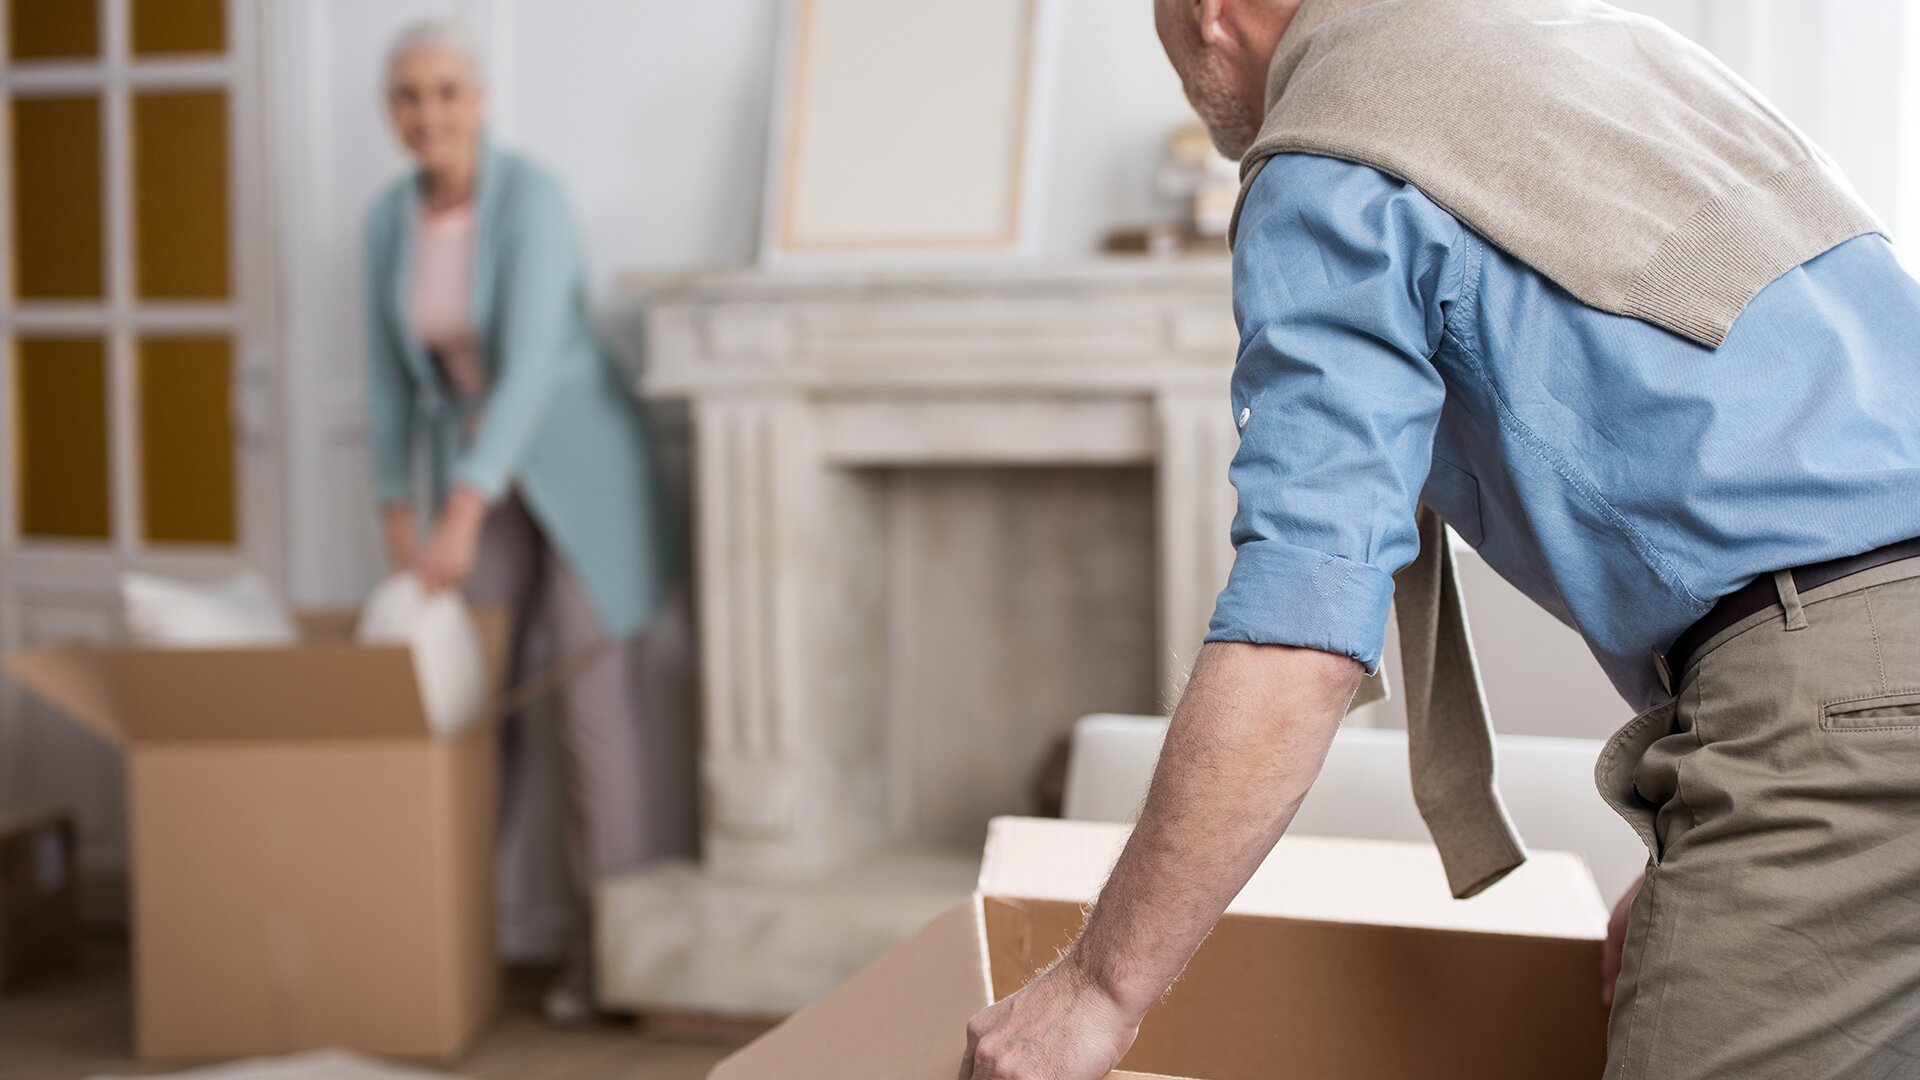 Webinar - Moving? Downsizing? Clearing Out?